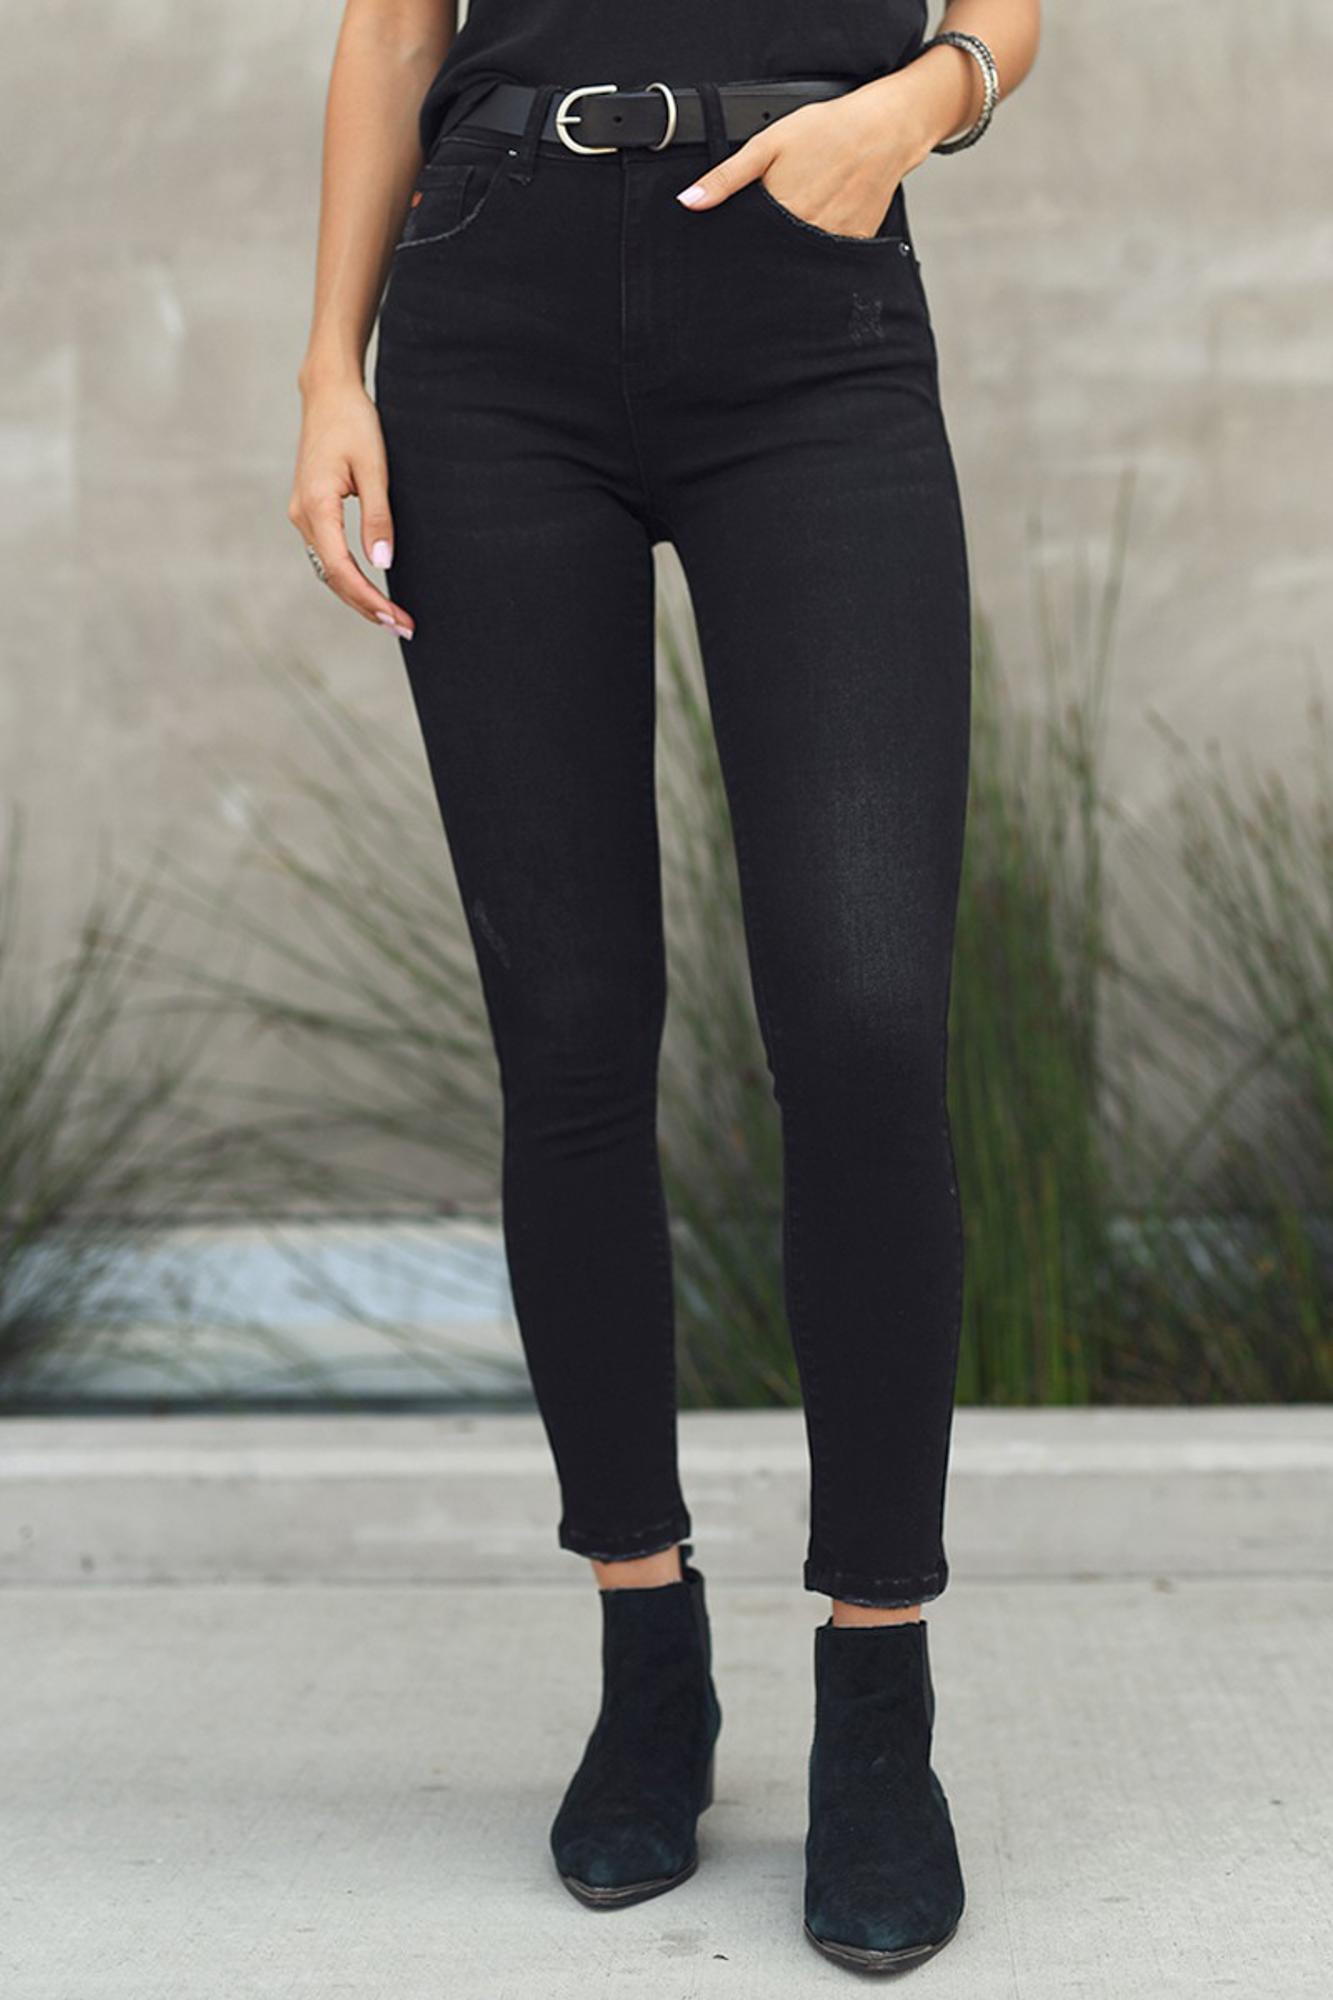 The Ciera High Rise Skinny Jeans